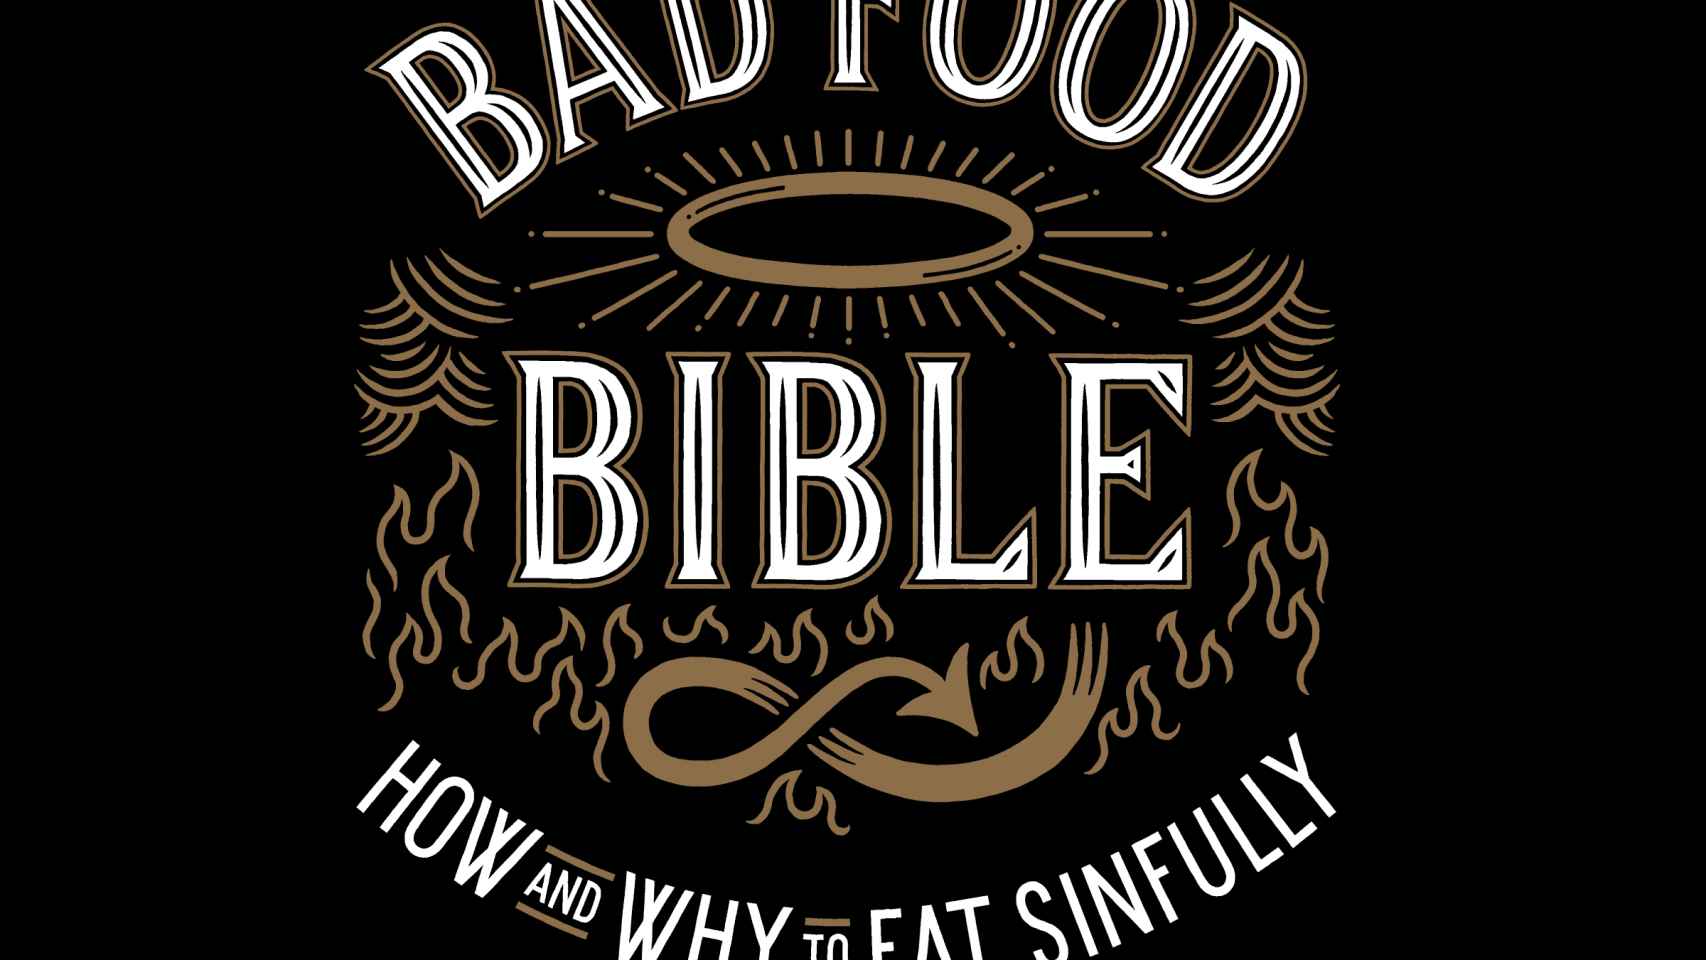 Portada de The Bad Food Bible: How and Why to Eat Sinfully, de Aaron Carroll.